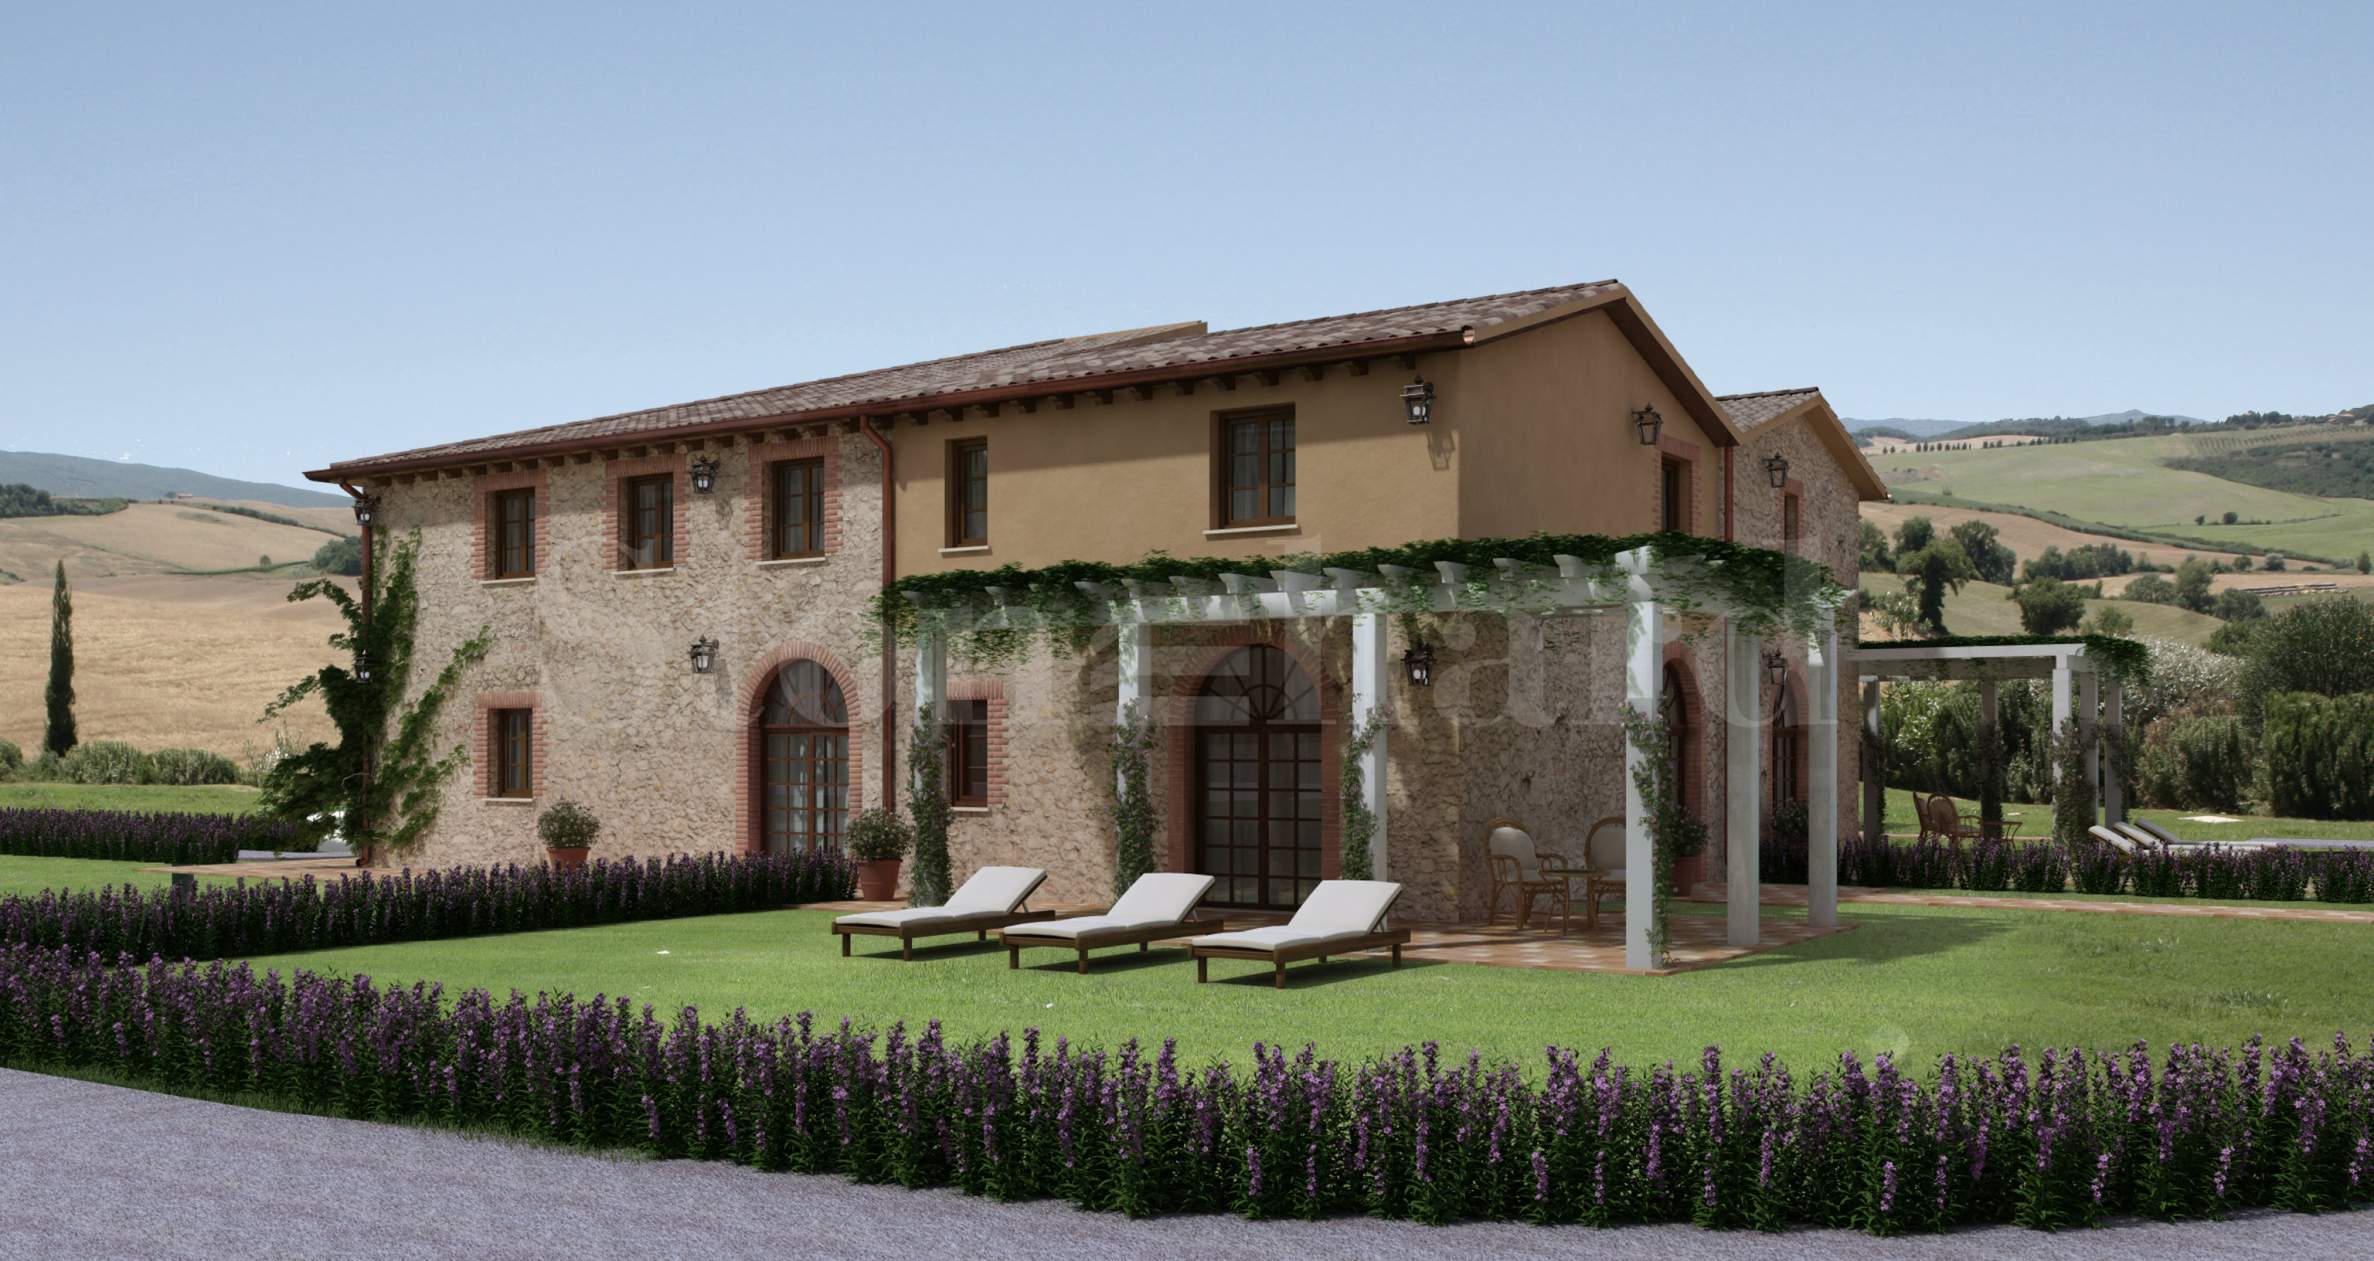 Cozy apartments in the postcard atmosphere of Tuscany1 - Stonehard